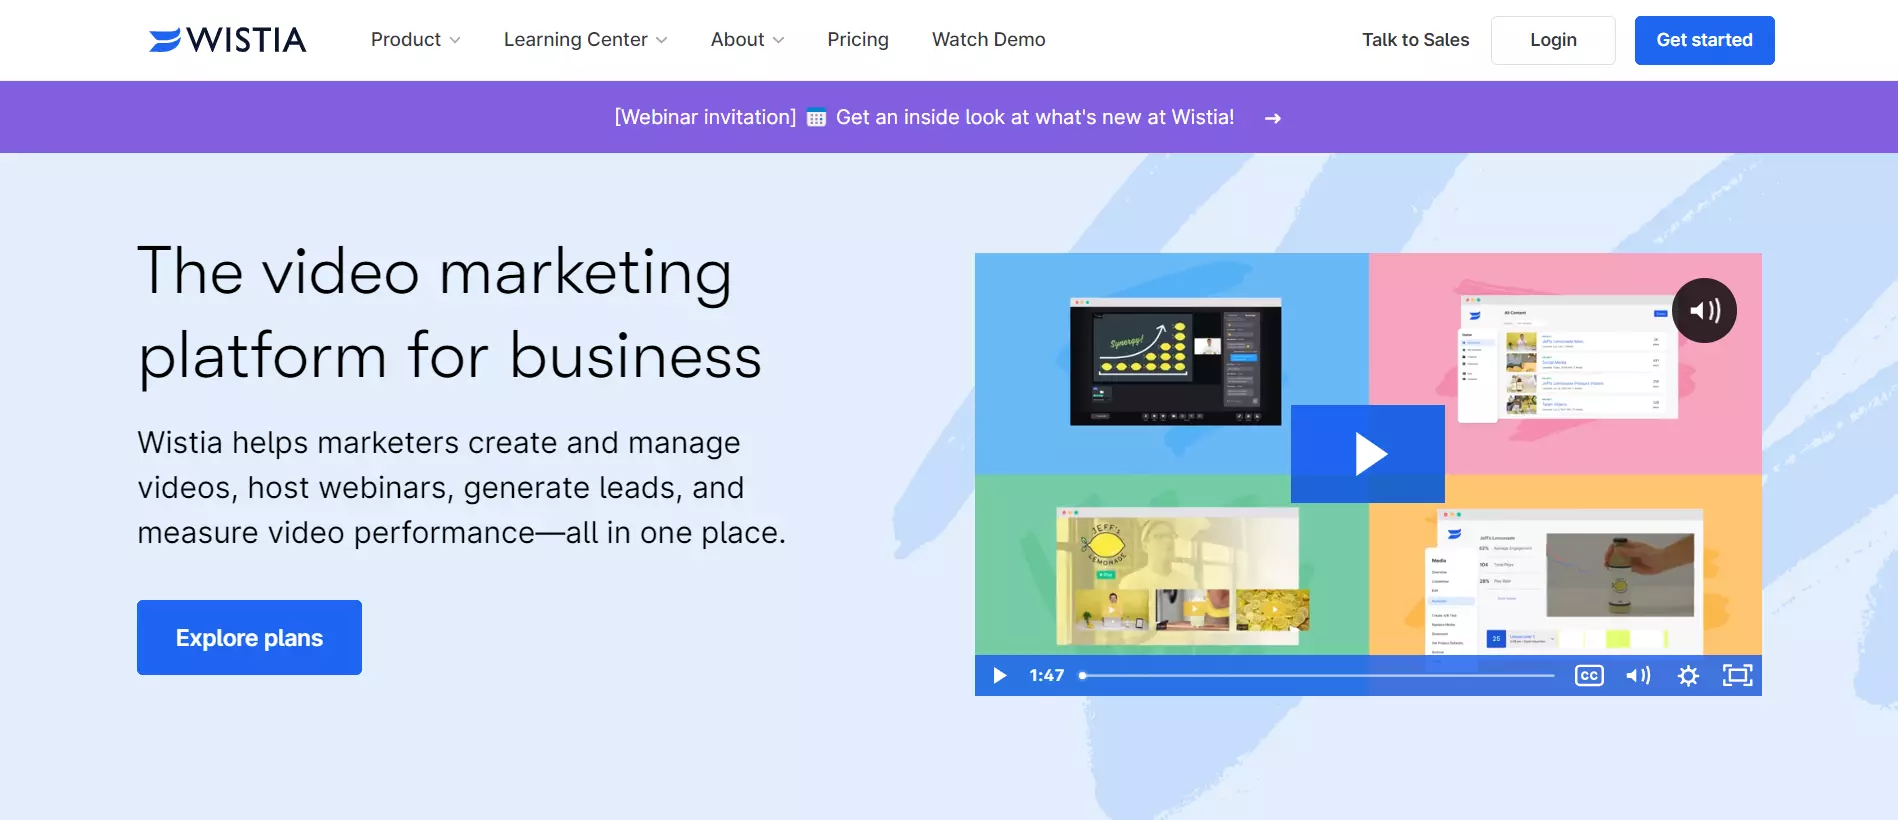 Wistia - Video Hosting and Marketing Tools for Business